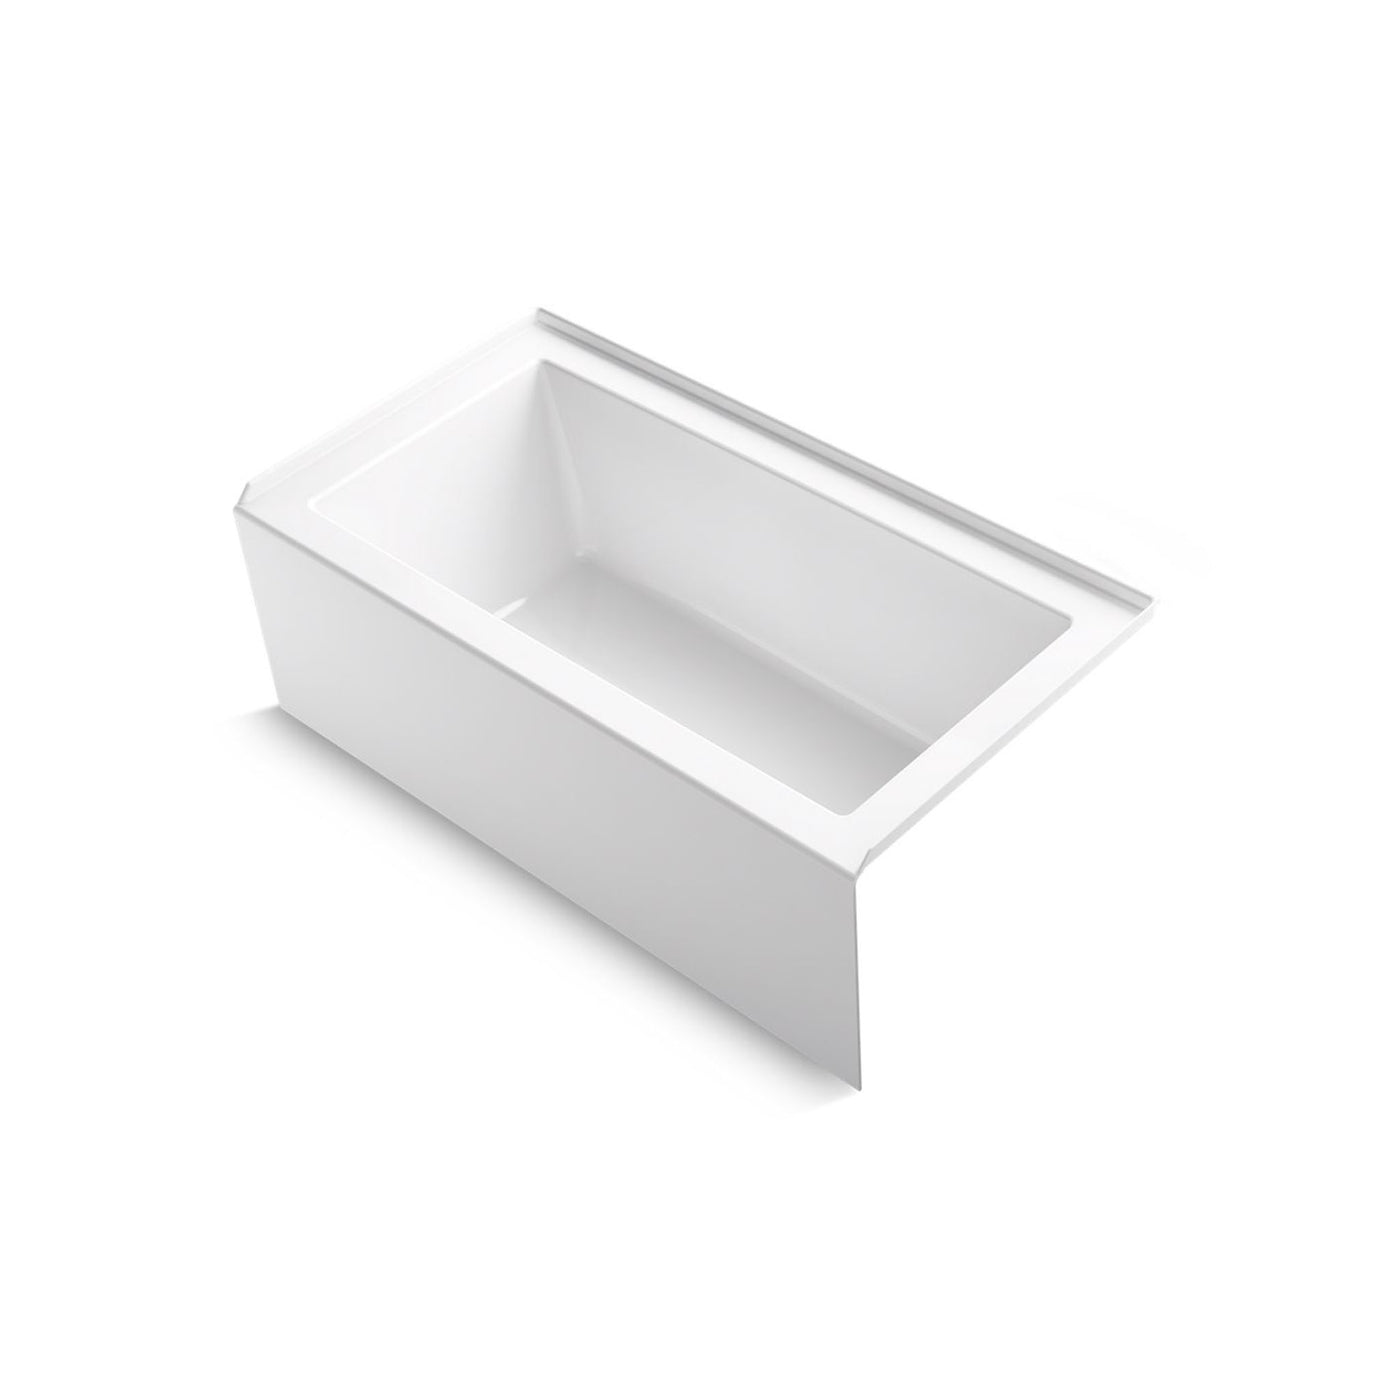 60" x 32" Underscore® alcove bath with integral apron, integral flange, and right-hand drain